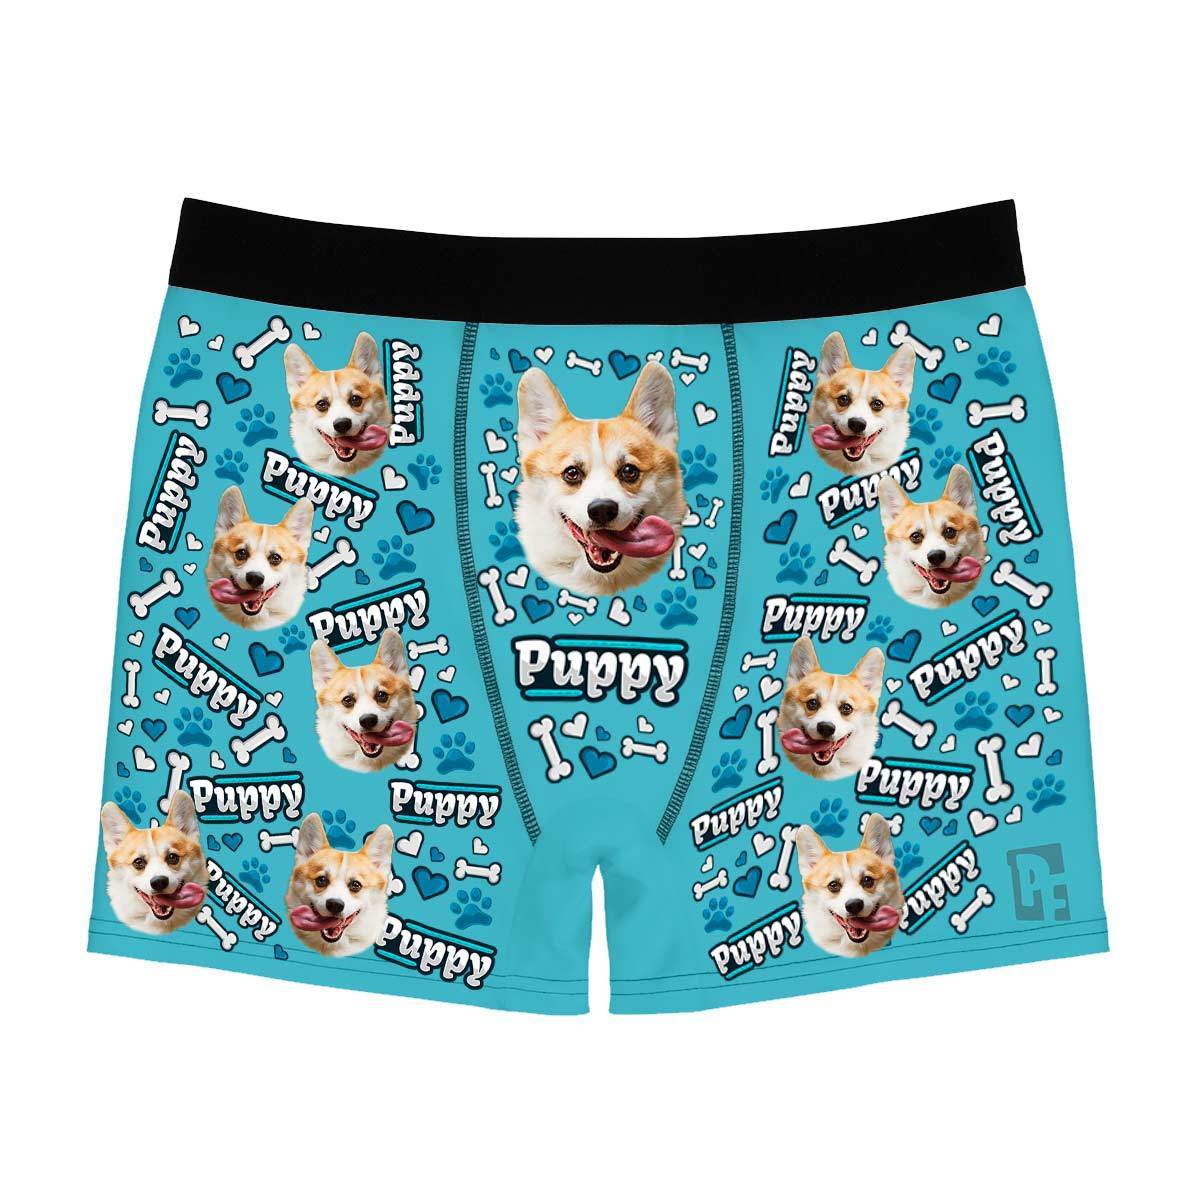 Blue Puppy men's boxer briefs personalized with photo printed on them